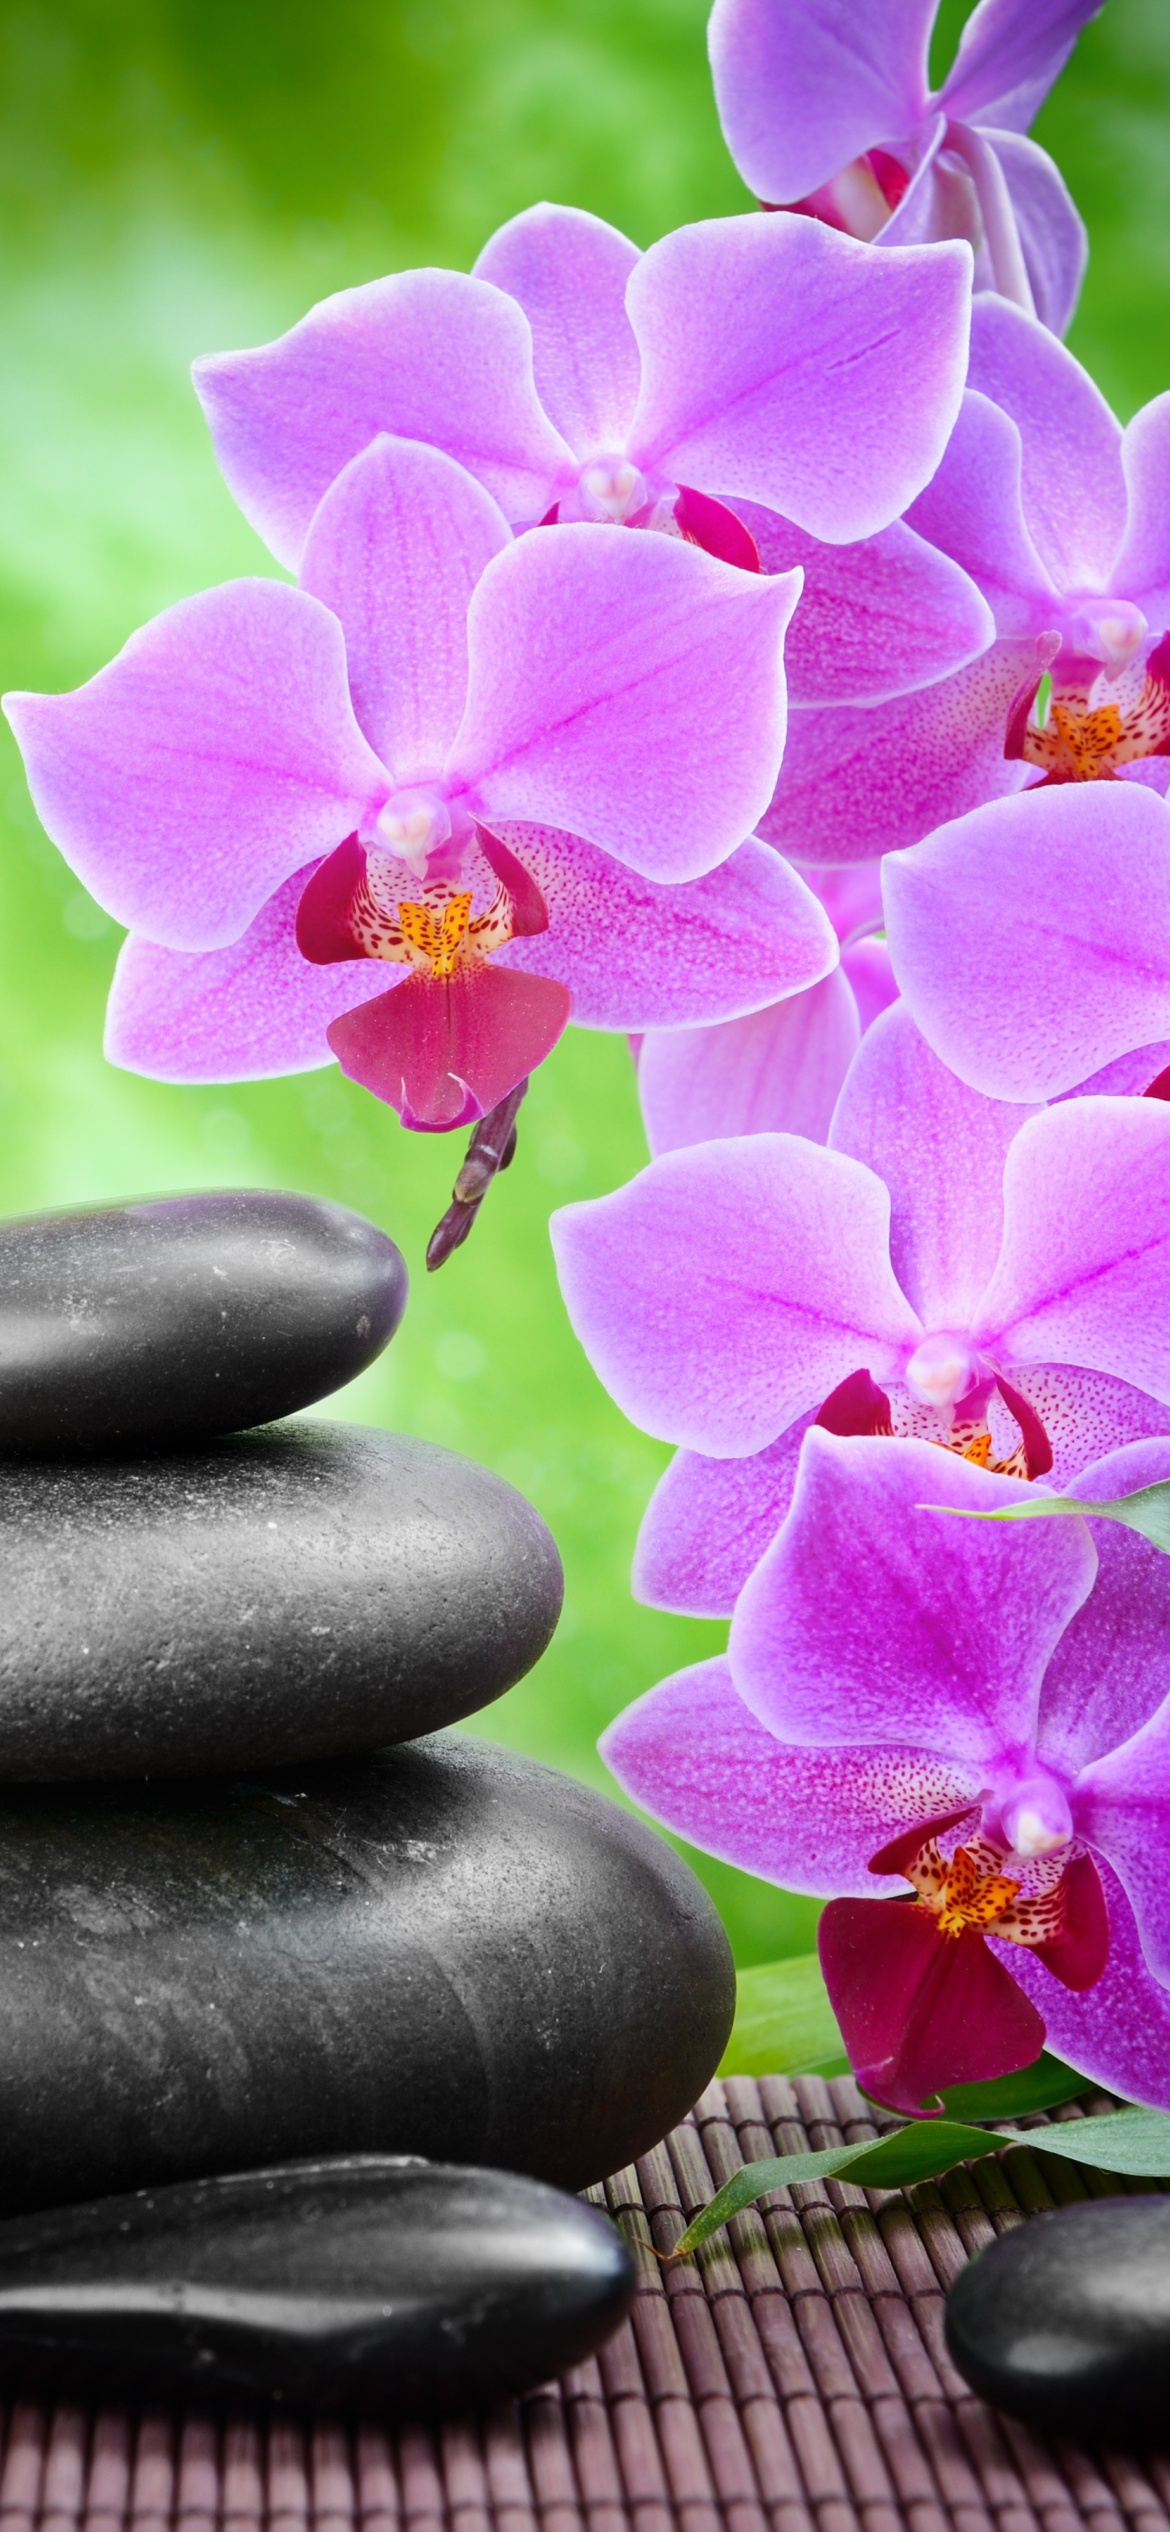 Pebbles, candles and orchids wallpaper 1170x2532